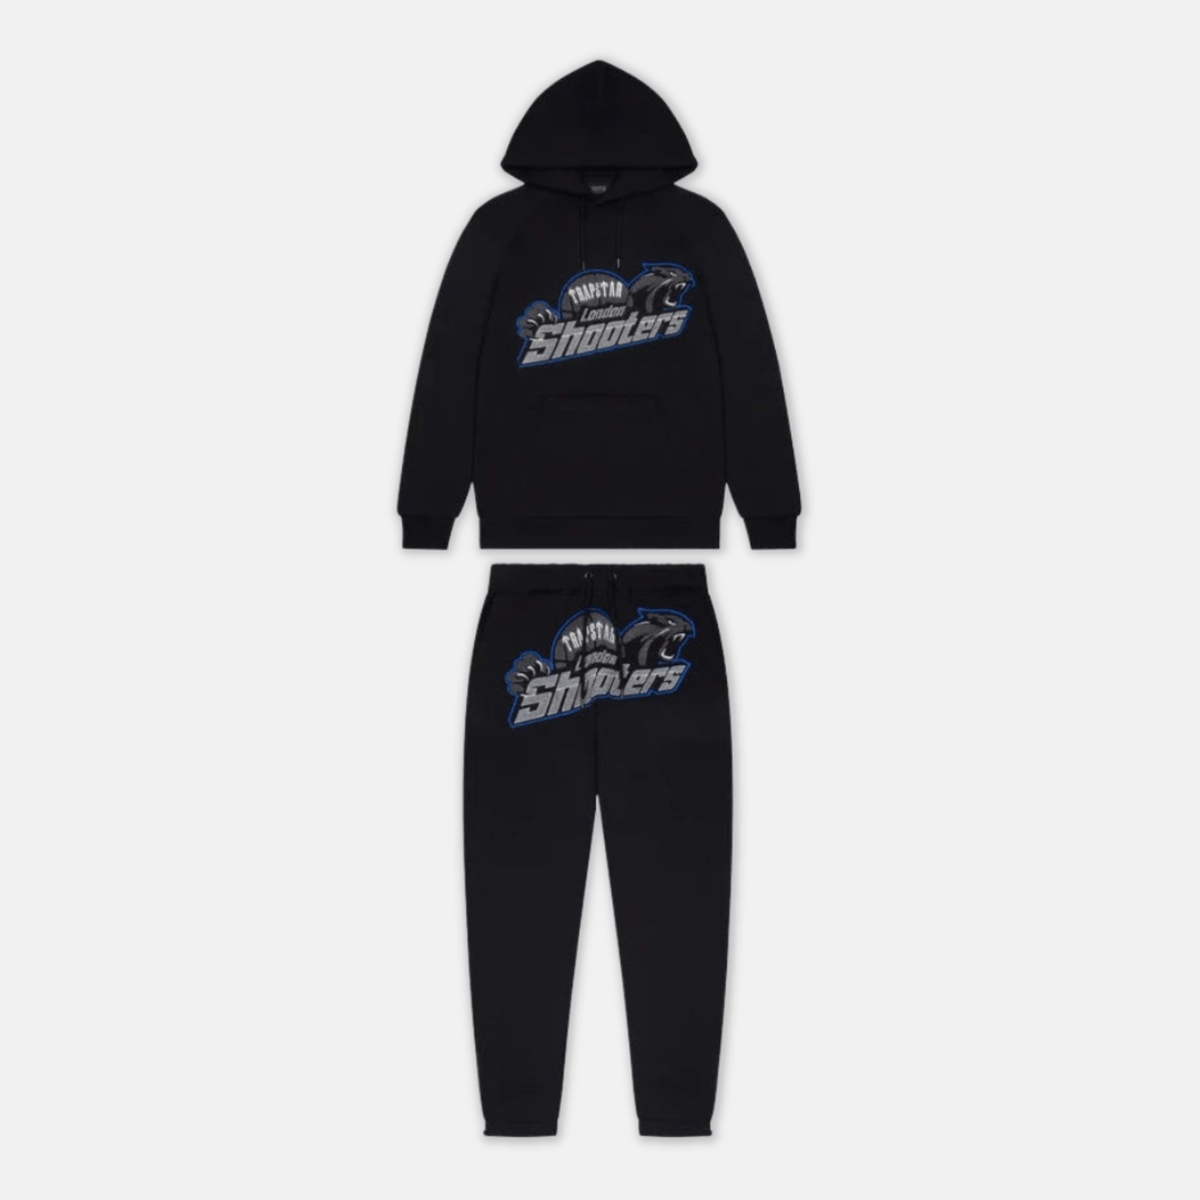 Trapstar Shooters Tracksuit - Black Ice Flavours - No Sauce The Plug